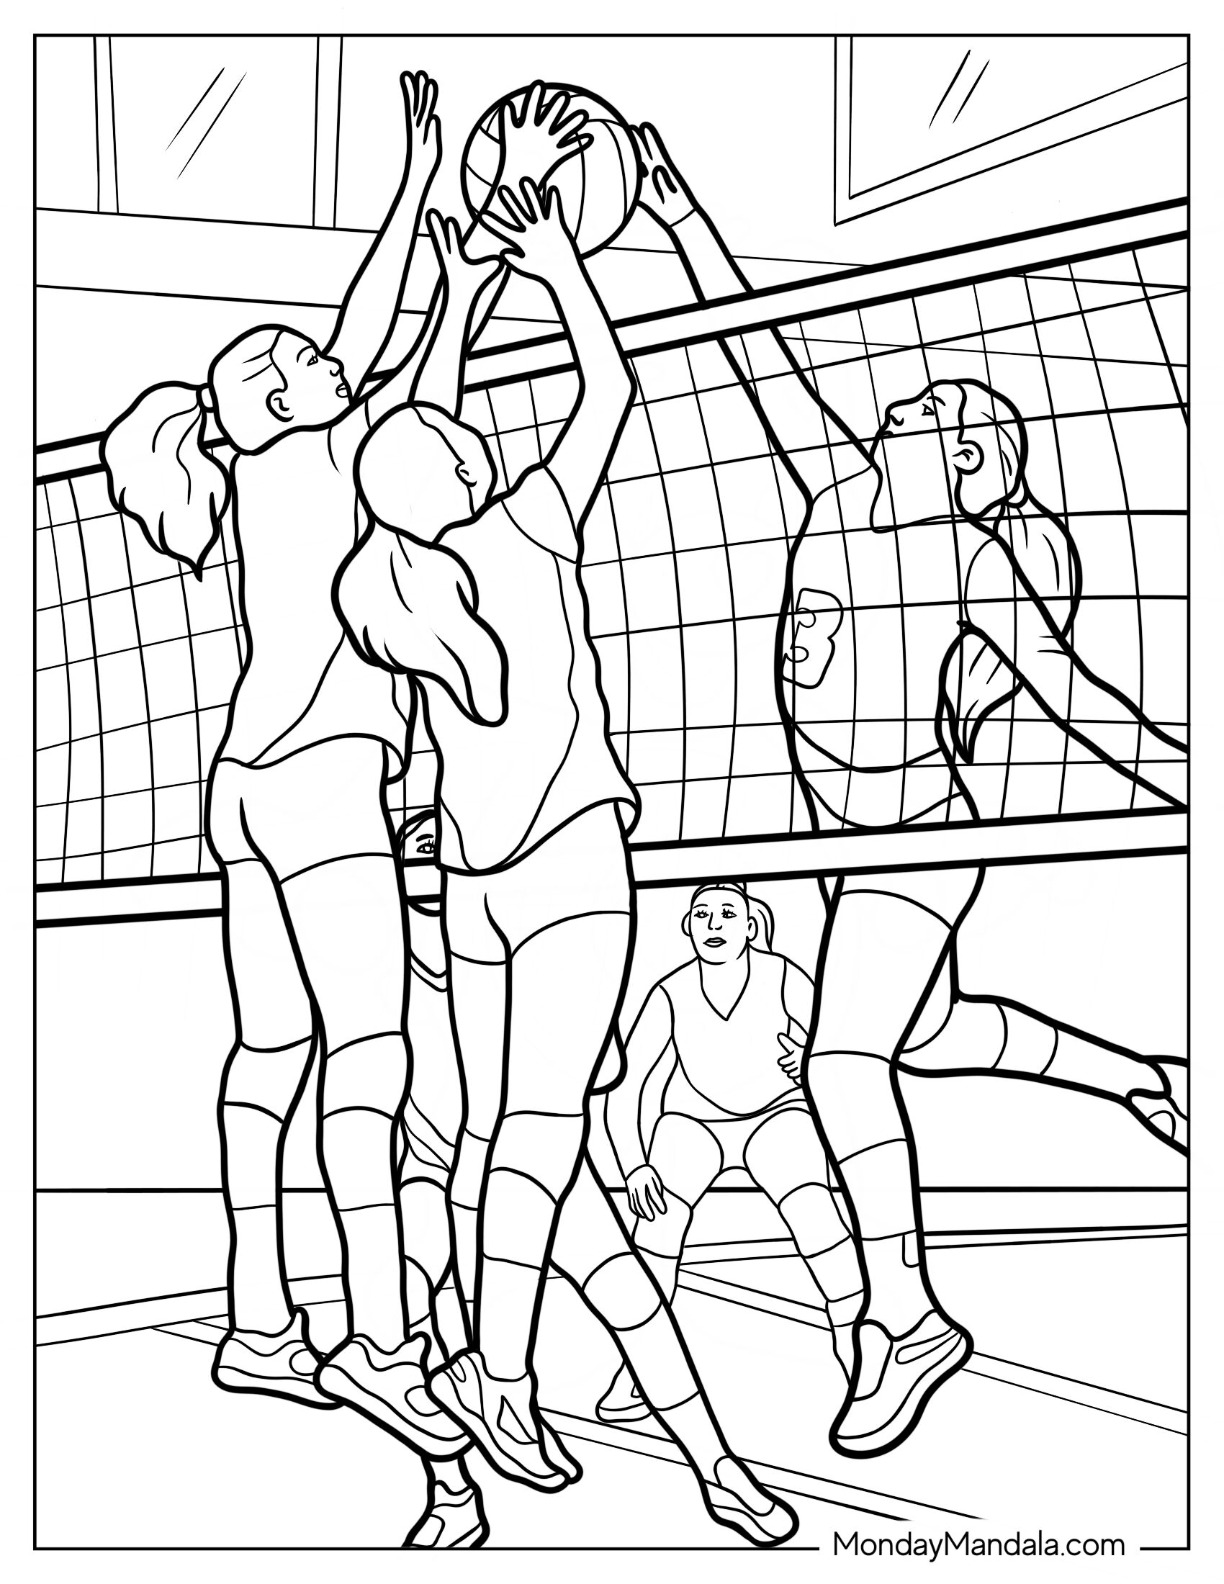 Volleyball coloring pages free pdf printables